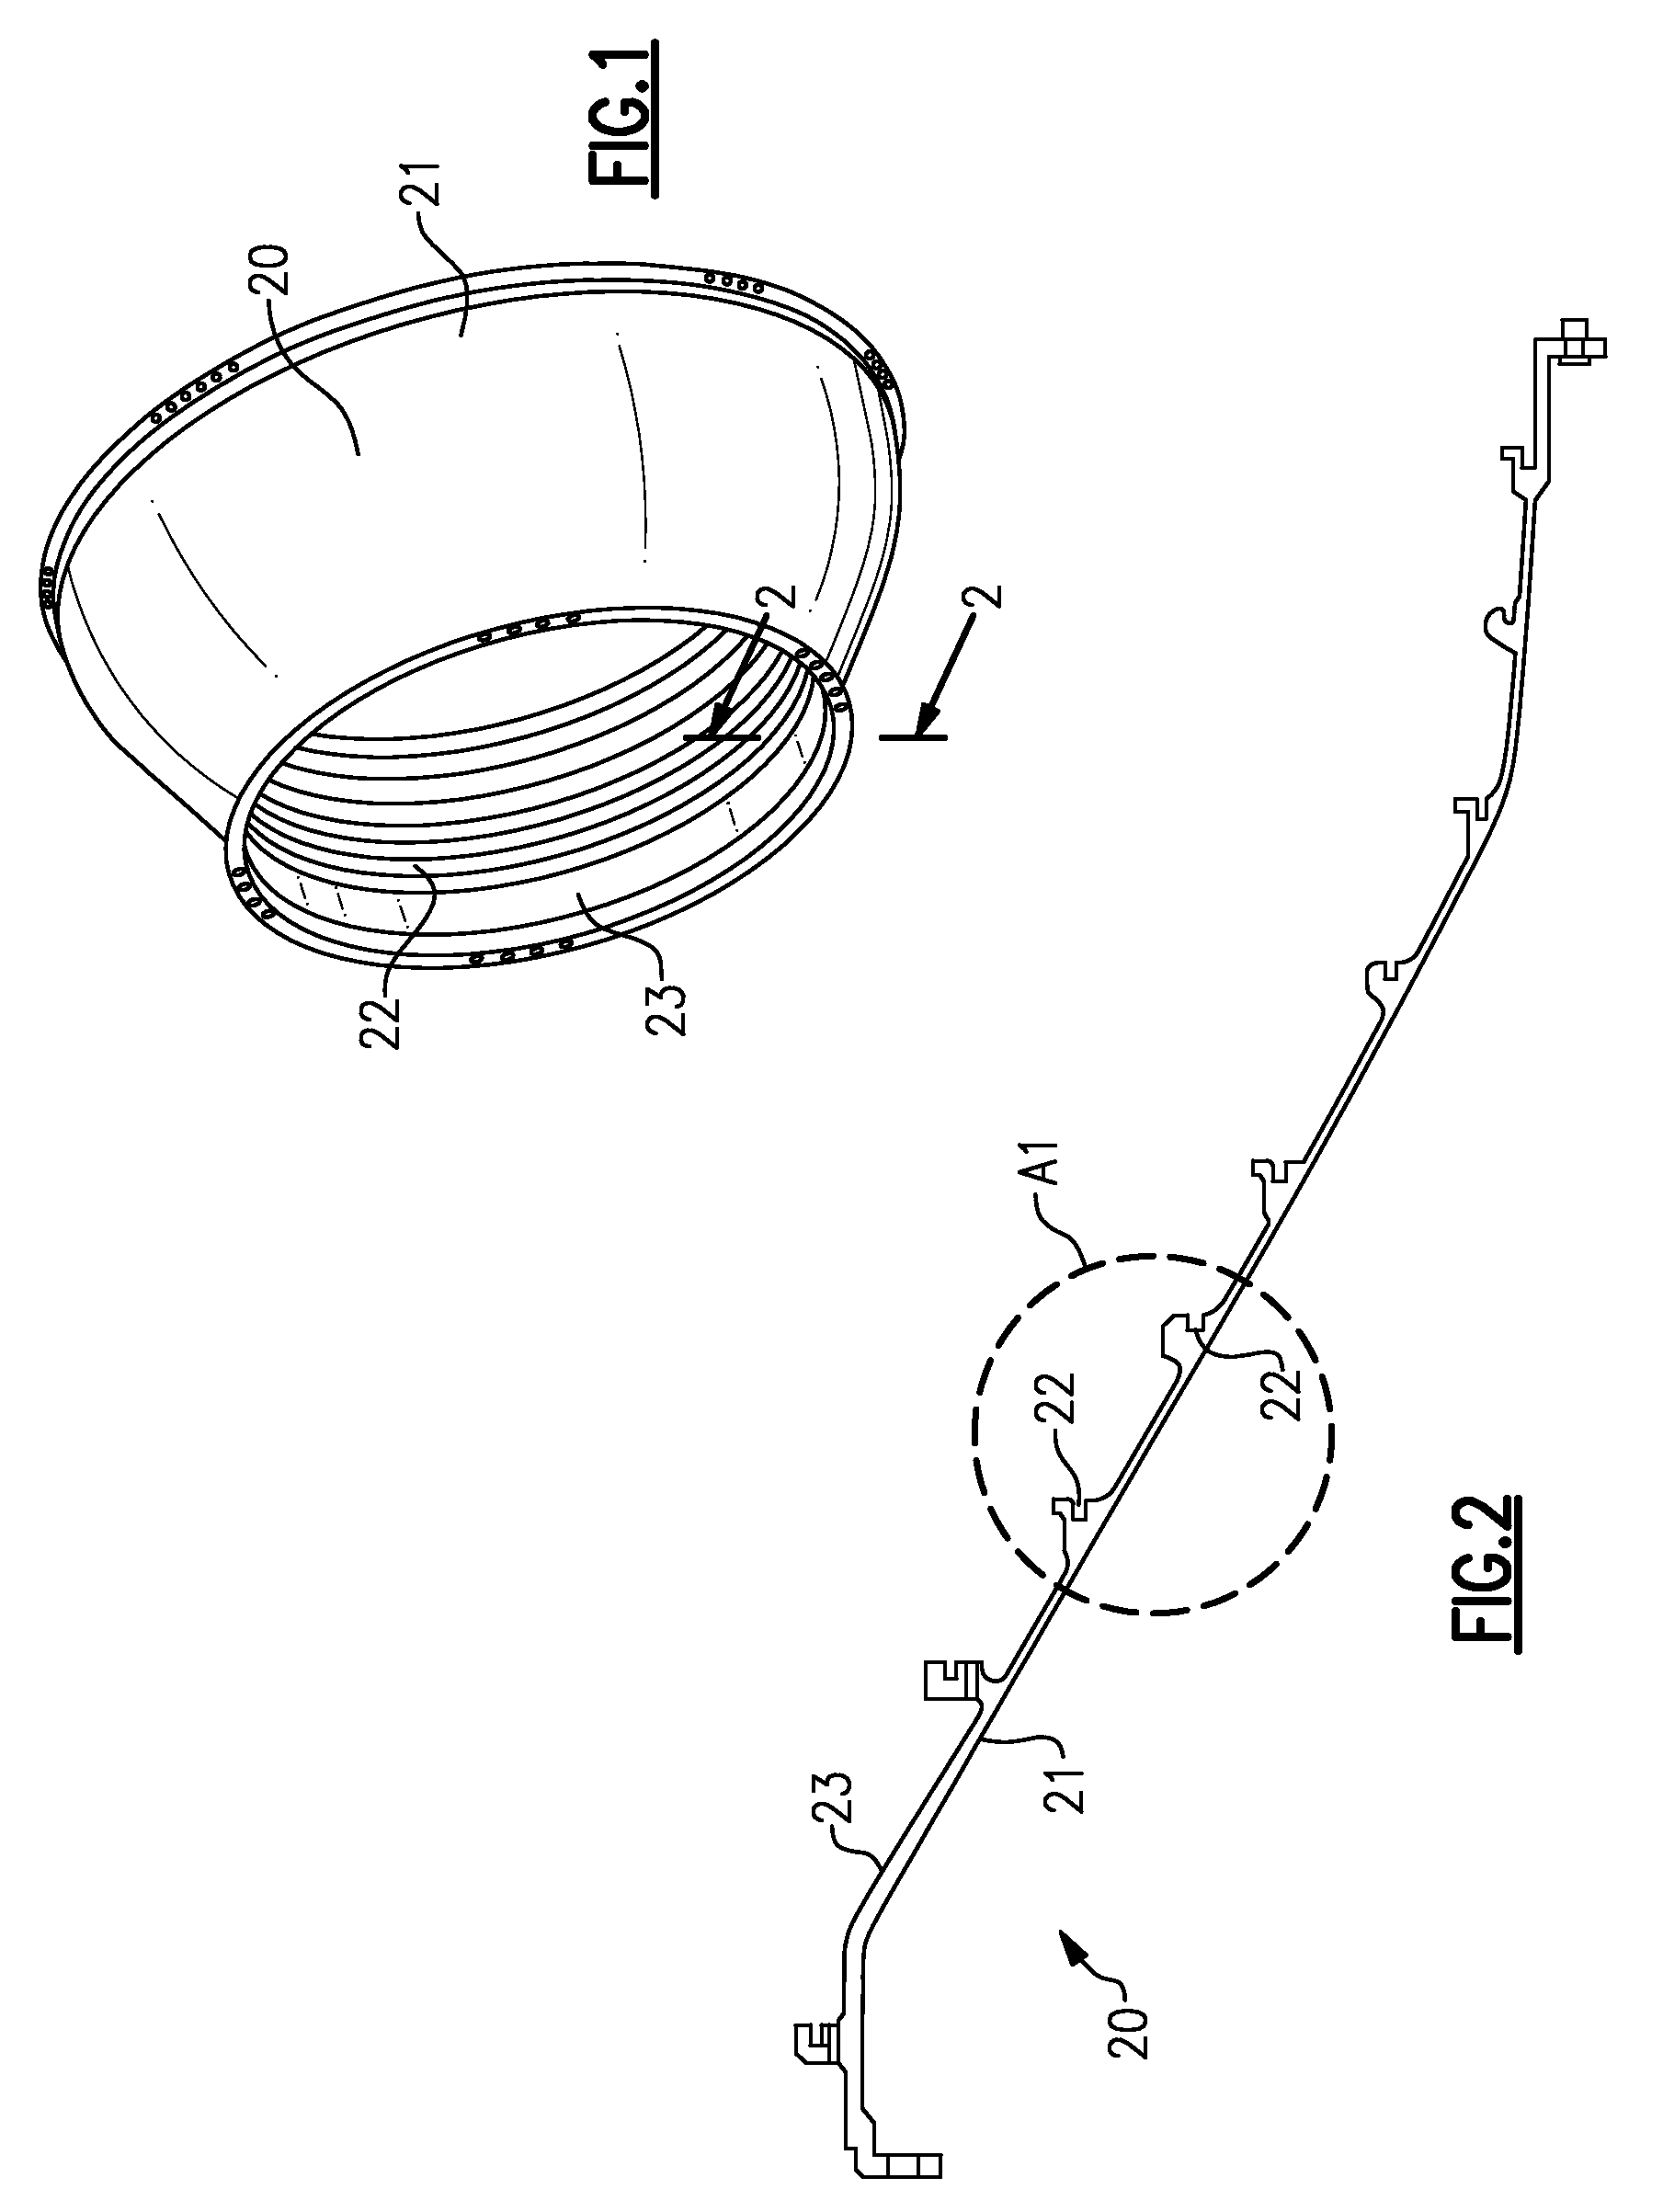 Repaired internal holding structures for gas turbine engine cases and method of repairing the same